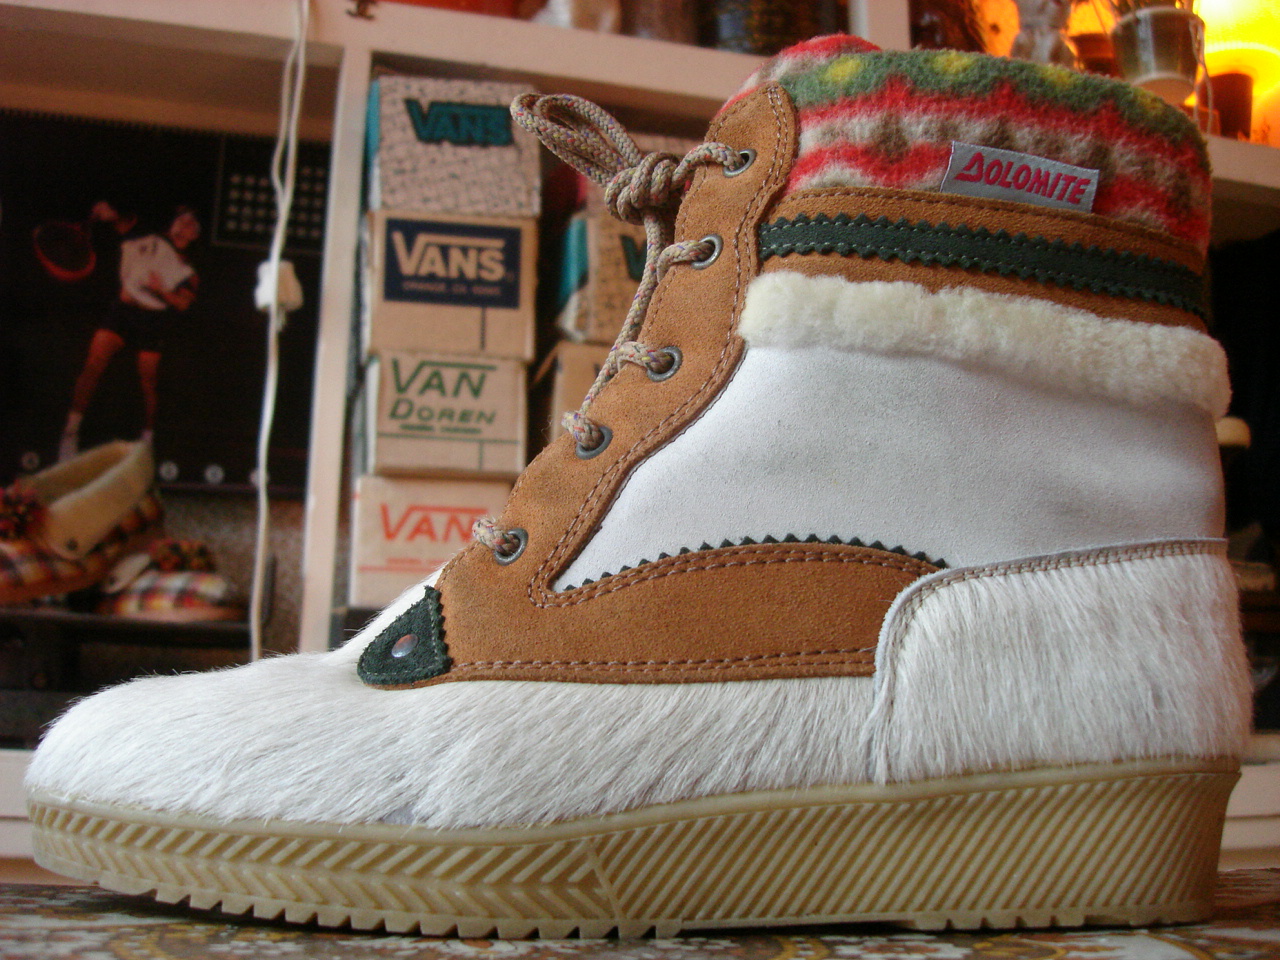 theothersideofthepillow: vintage DOLOMITE arctic hiking boots MADE IN ...